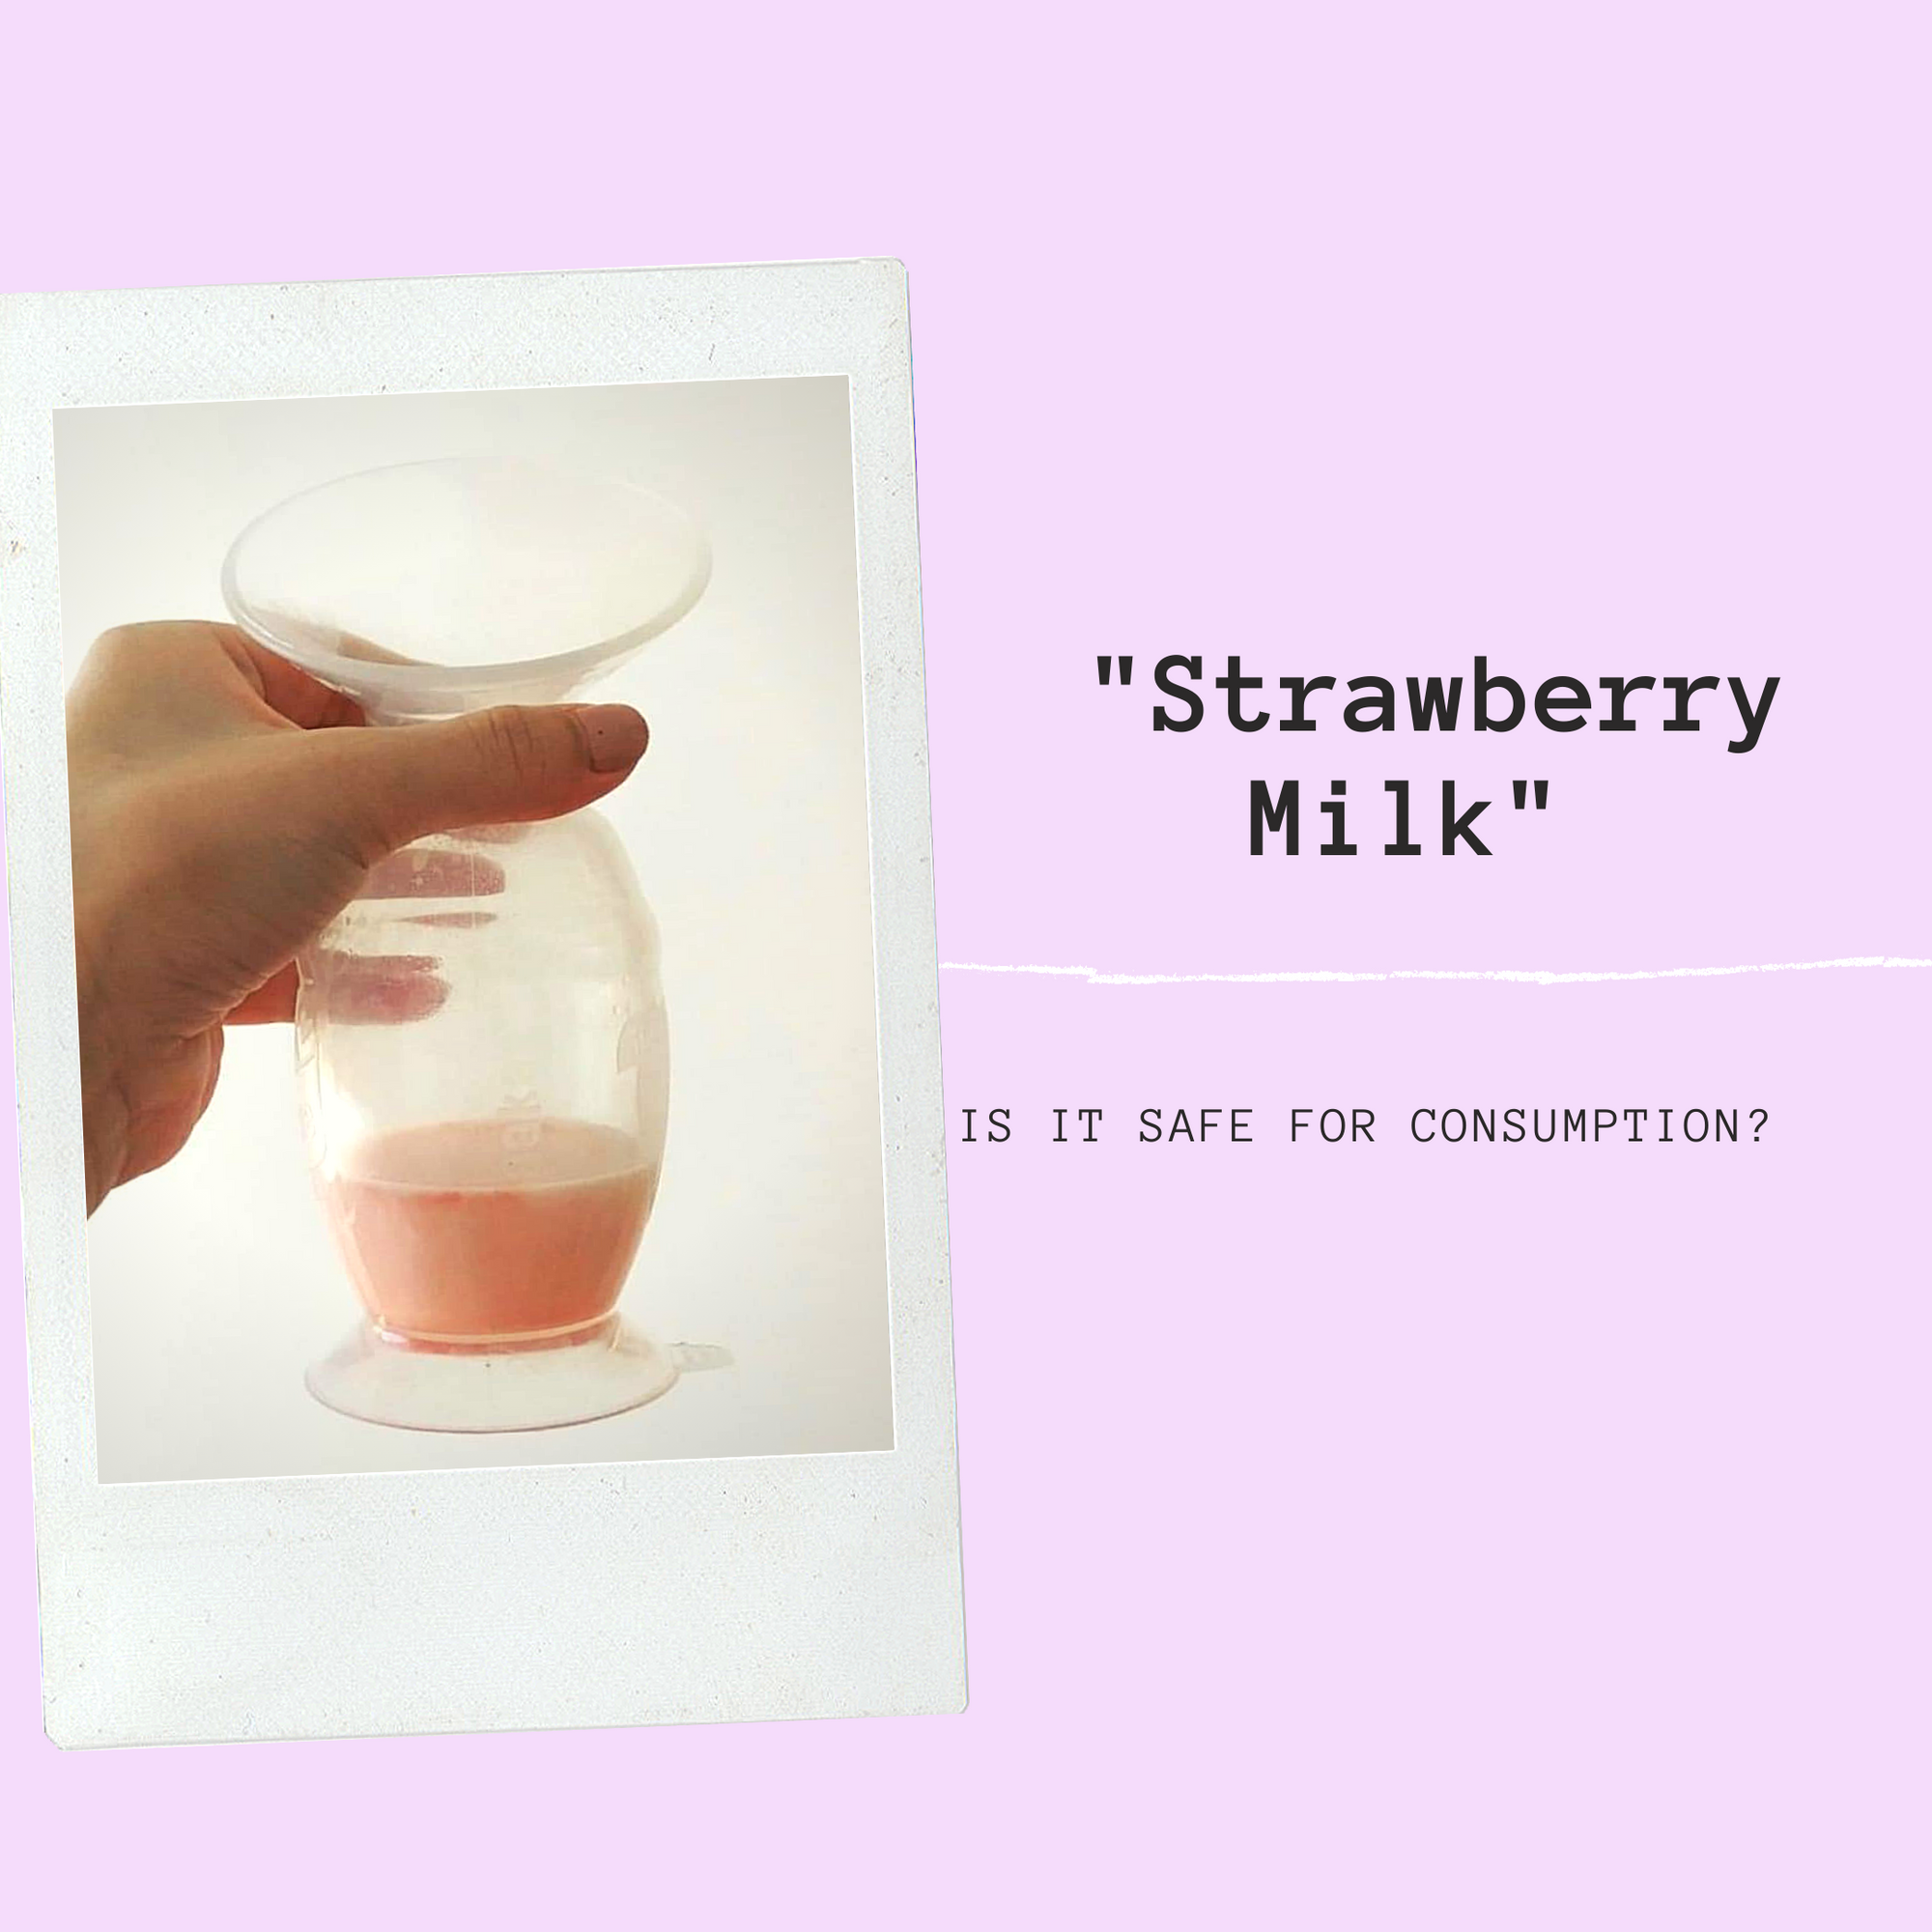 Strawberry Milk - Is It Safe For Consumption?